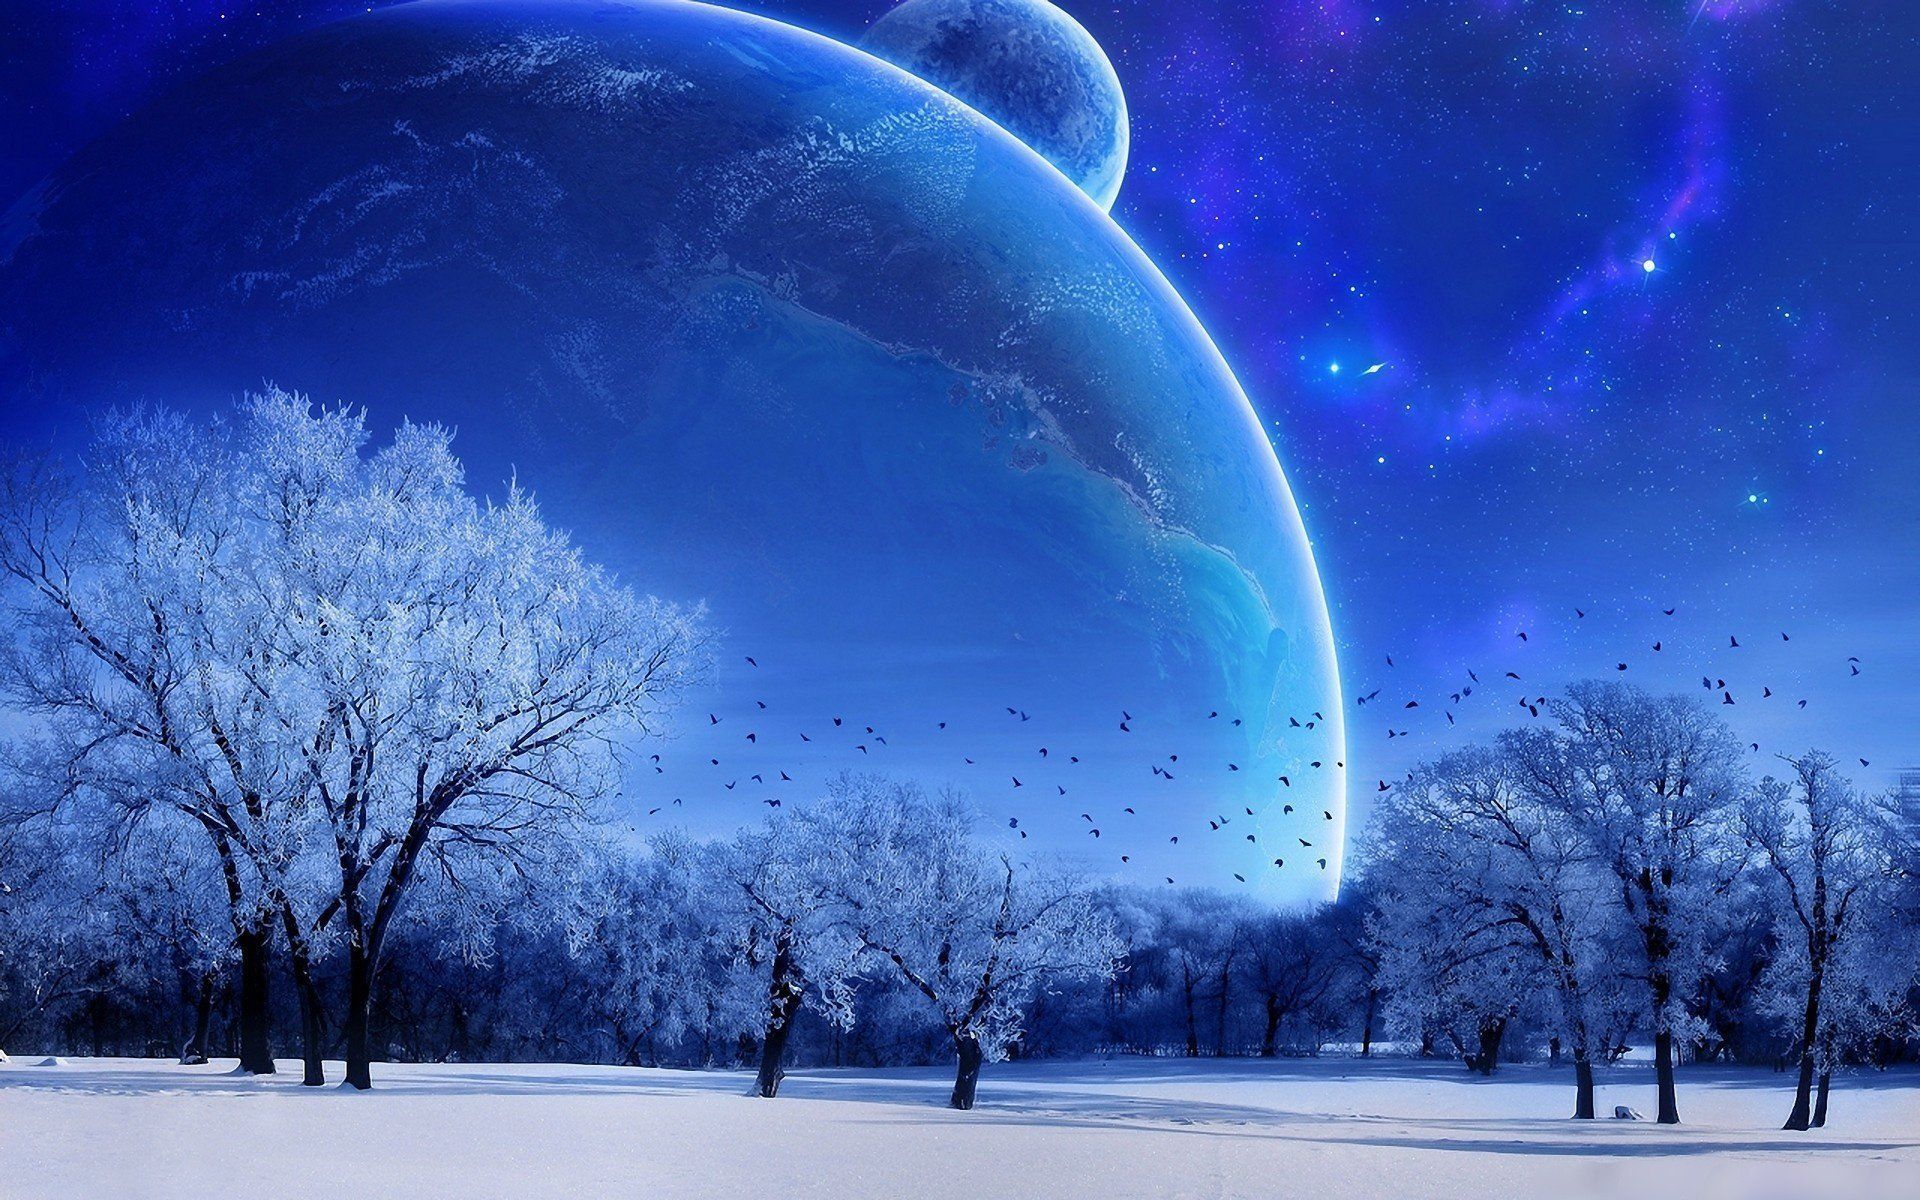 Moon and Snow Wallpaper